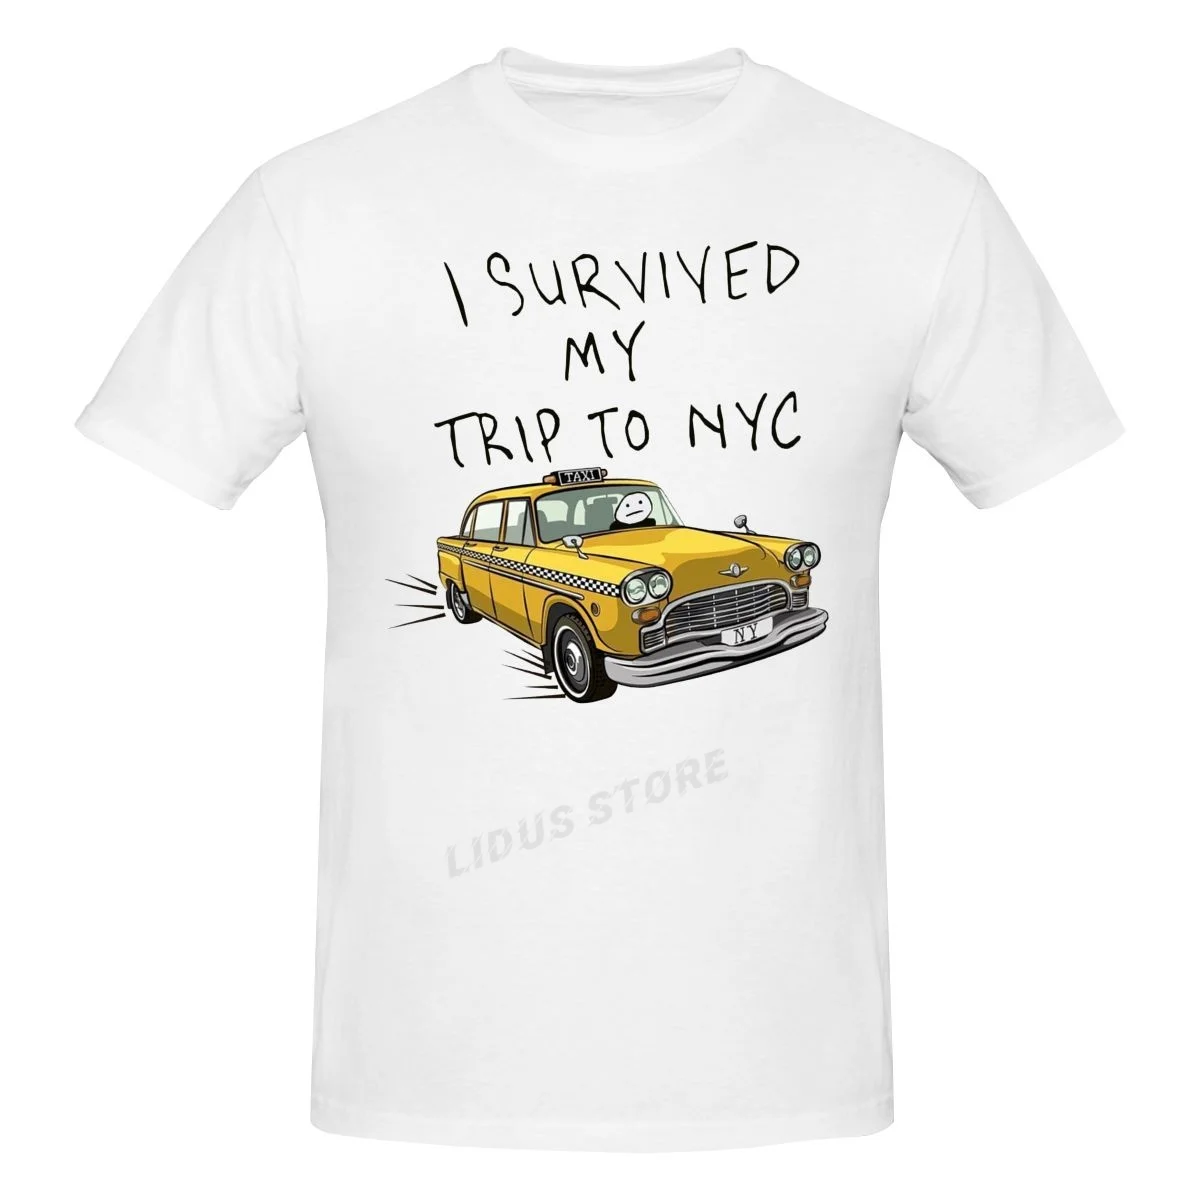 

Tom Holland Same Style Tees I Survived My Trip To NYC T-shirt Casual 100%Cotton Streetwear Men Women Unisex Fashion T Shirt